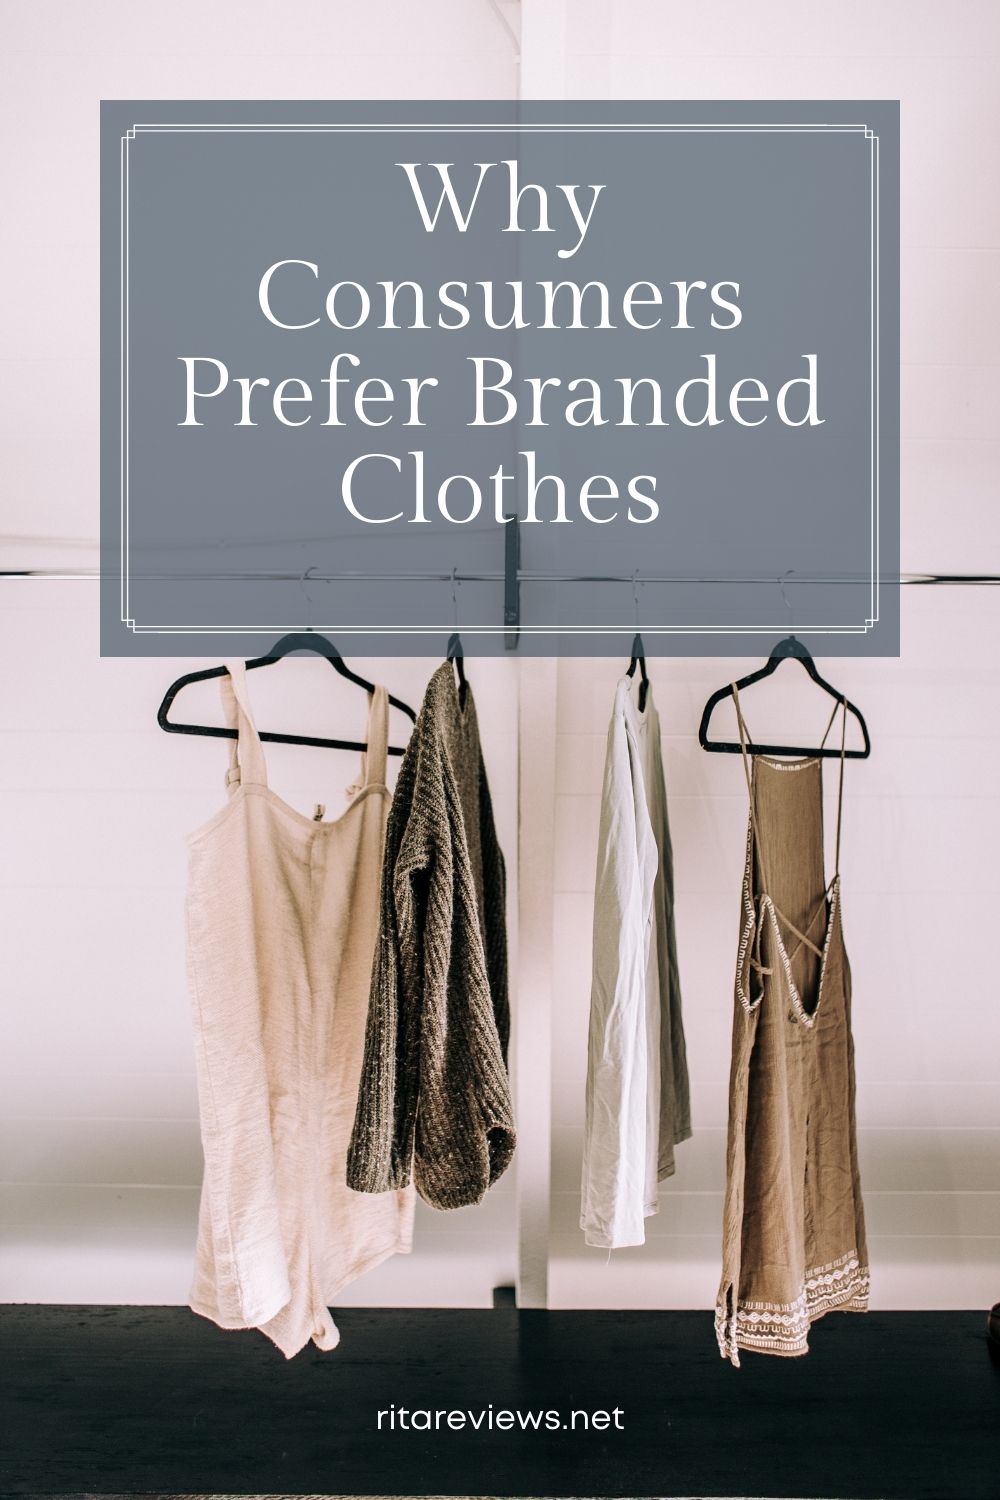 Why Consumers Prefer Branded Clothes